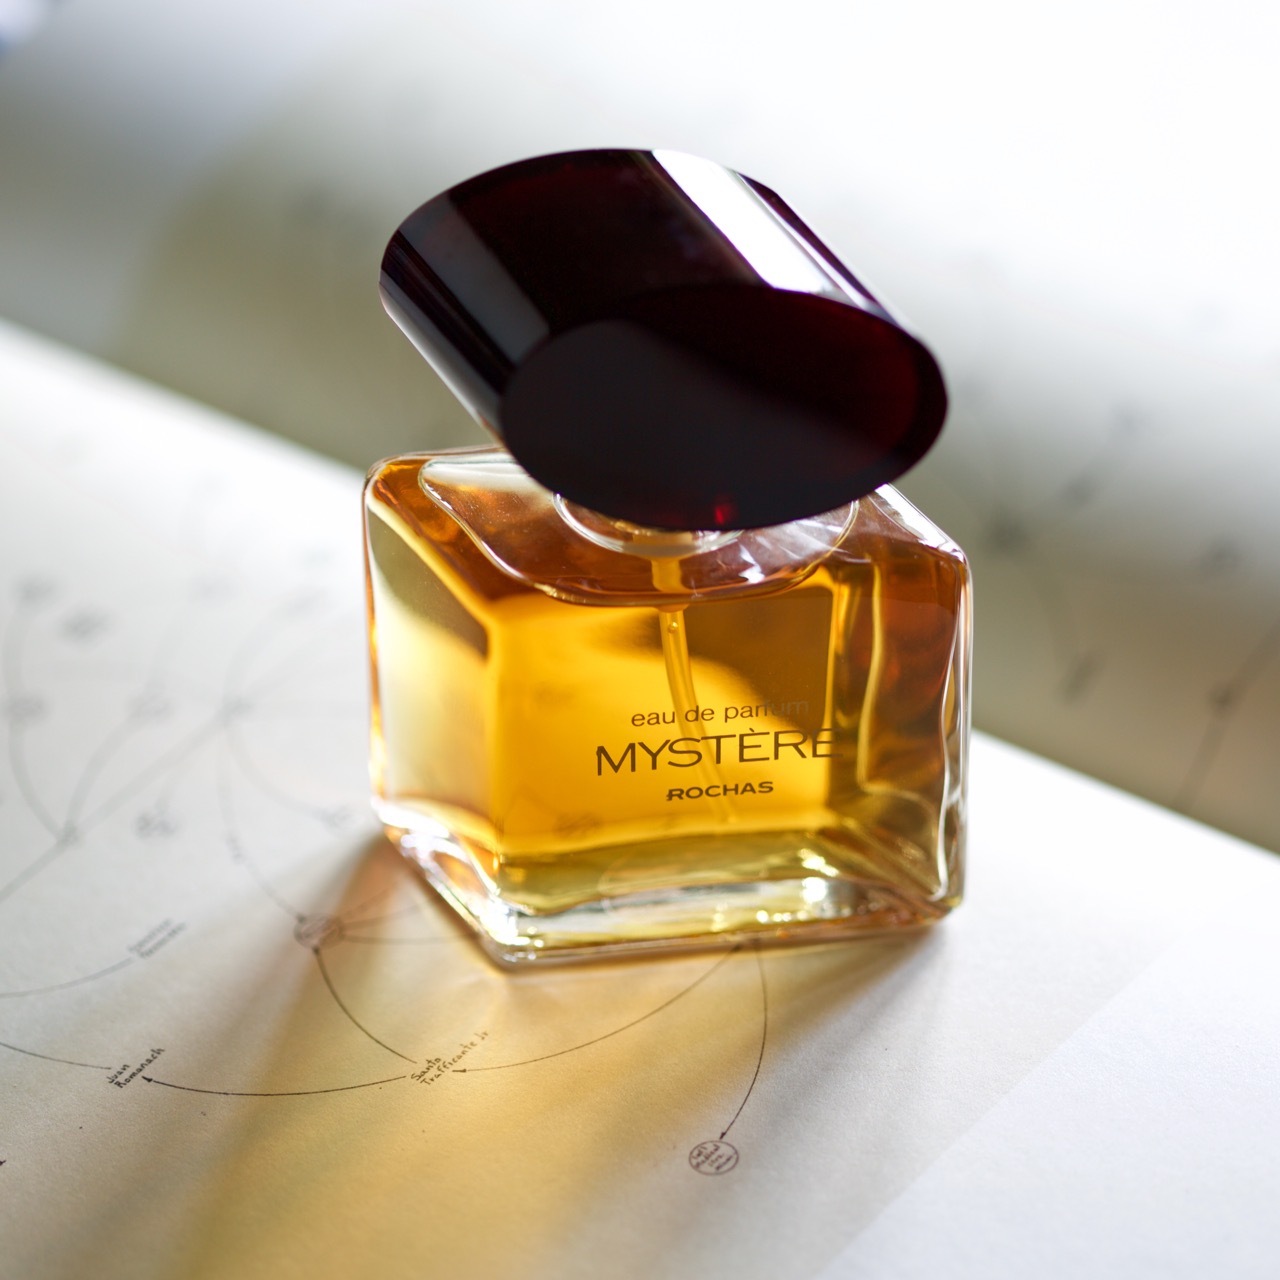 Rochas' Mystere (1978) – Life with Perfumes